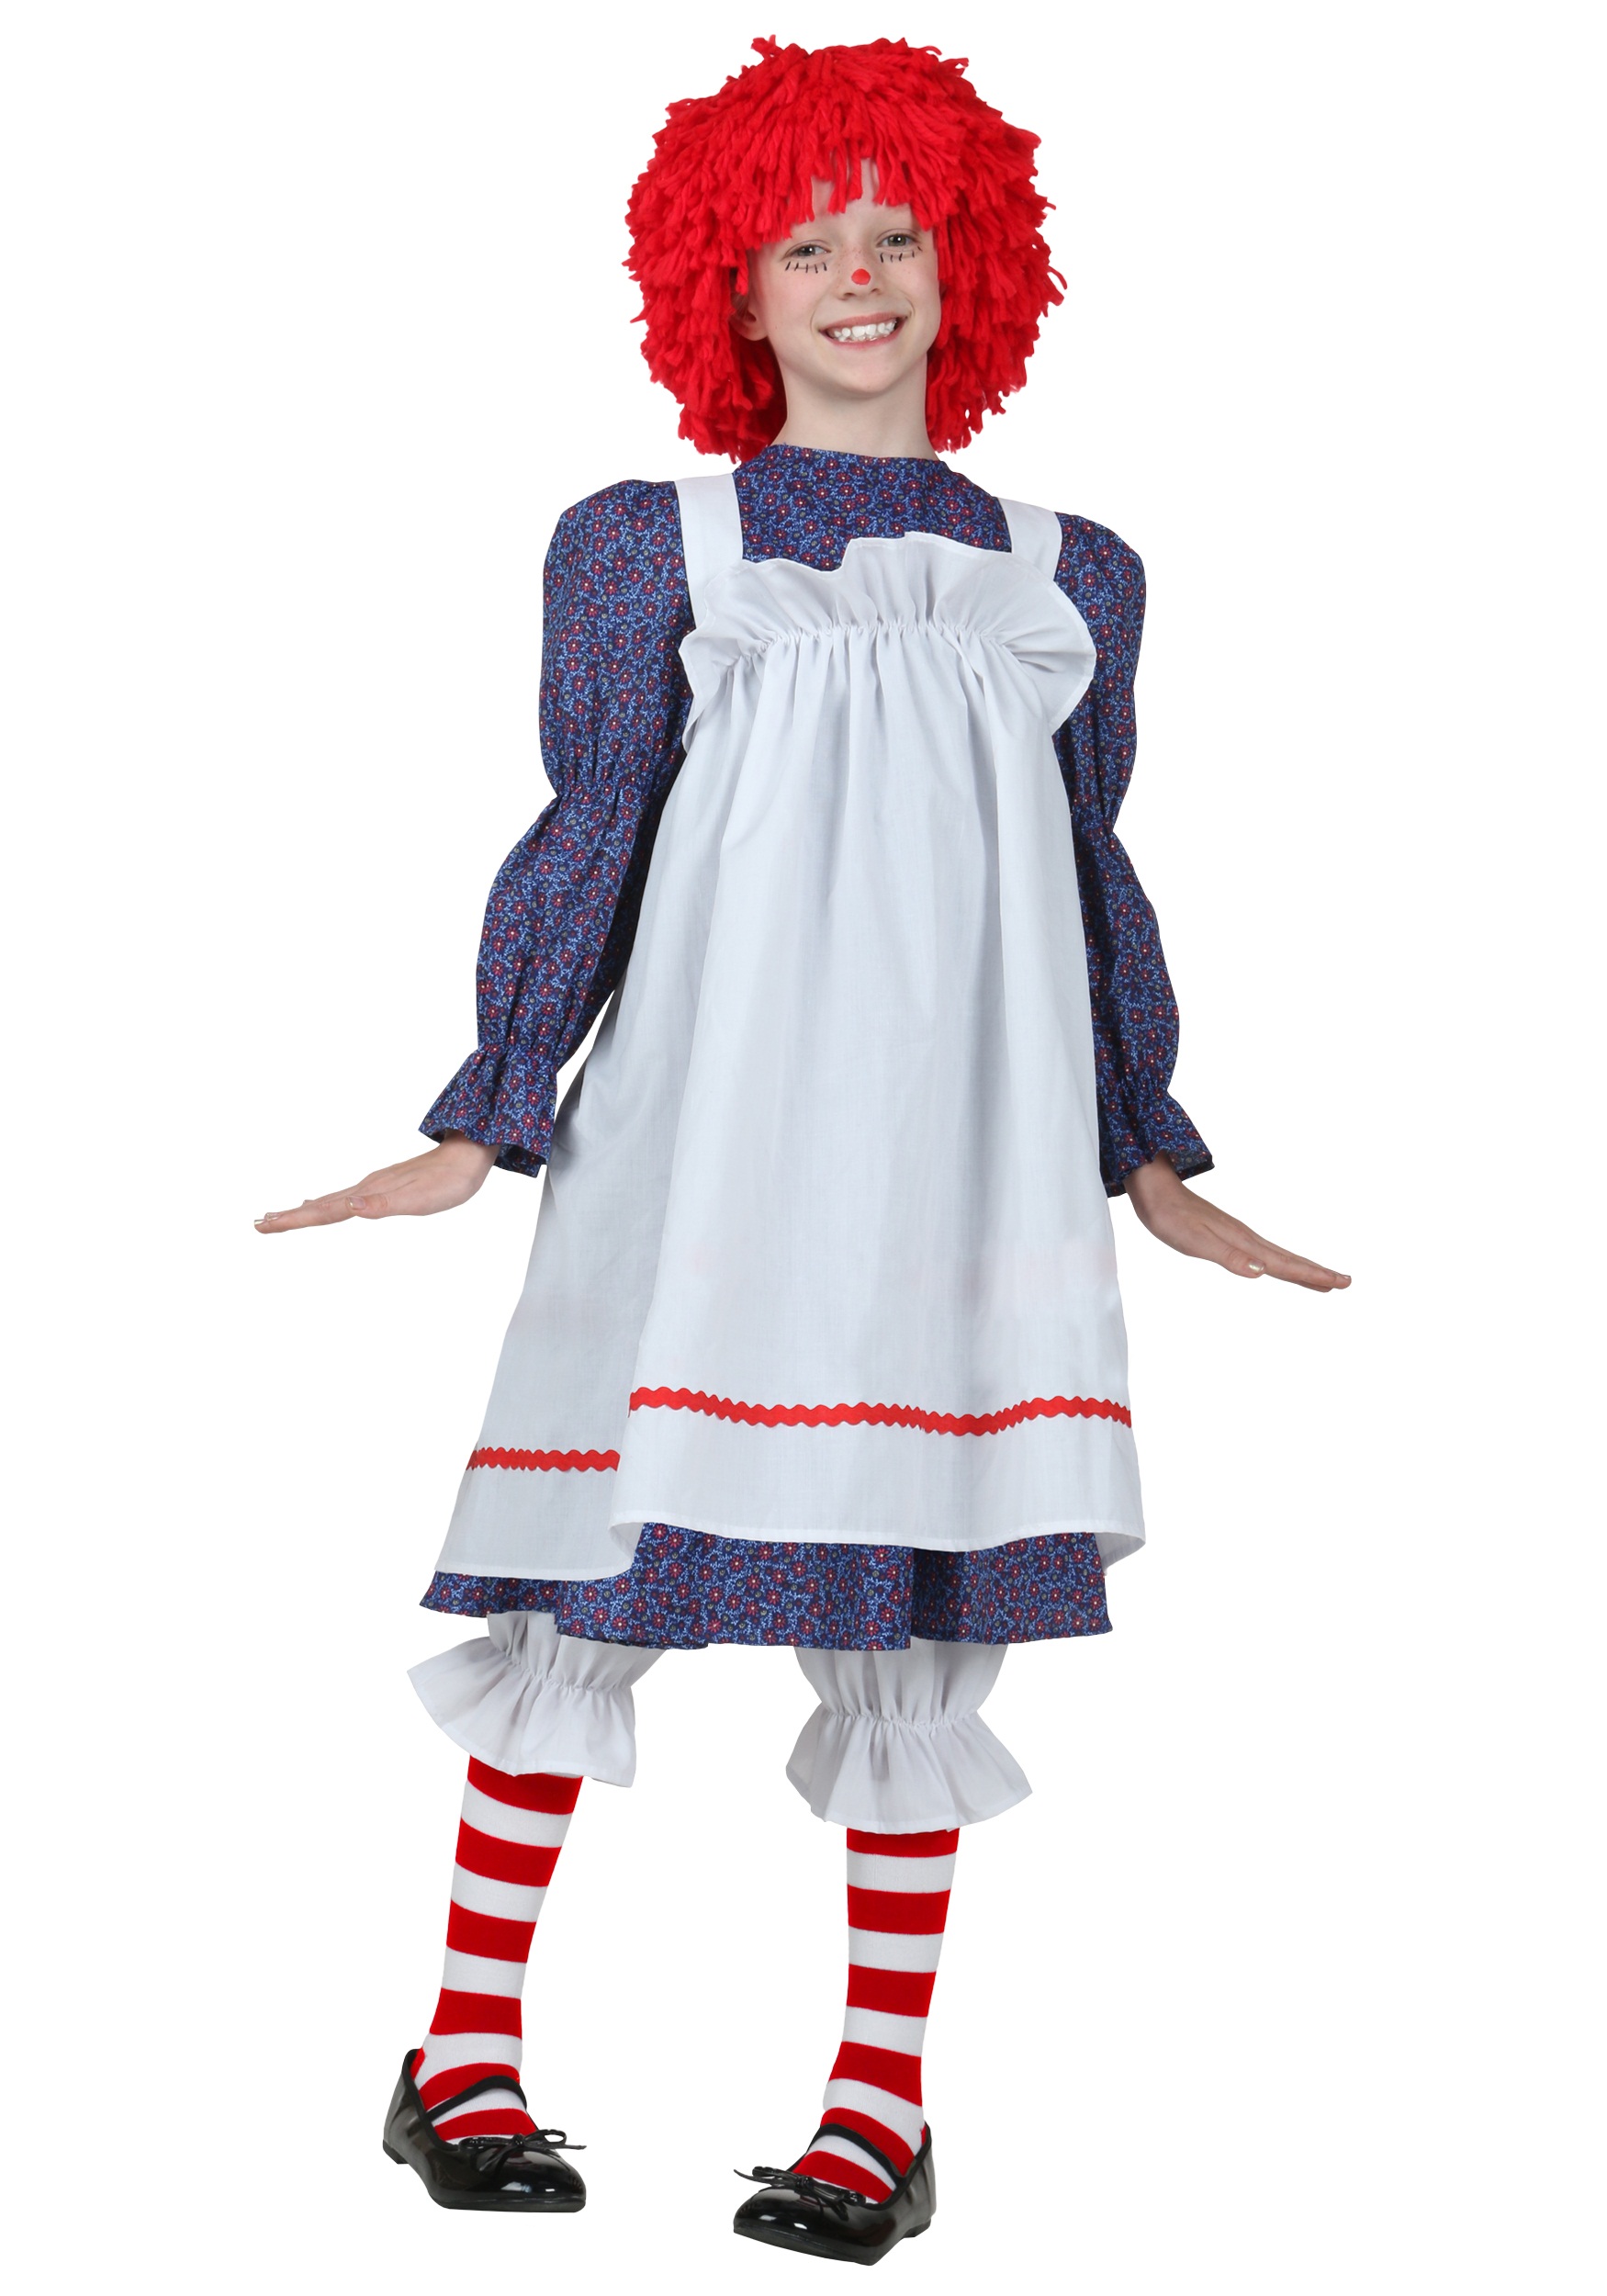 Photos - Fancy Dress FUN Costumes Rag Doll Costume For Kids Blue/Red/White FUN1613CH